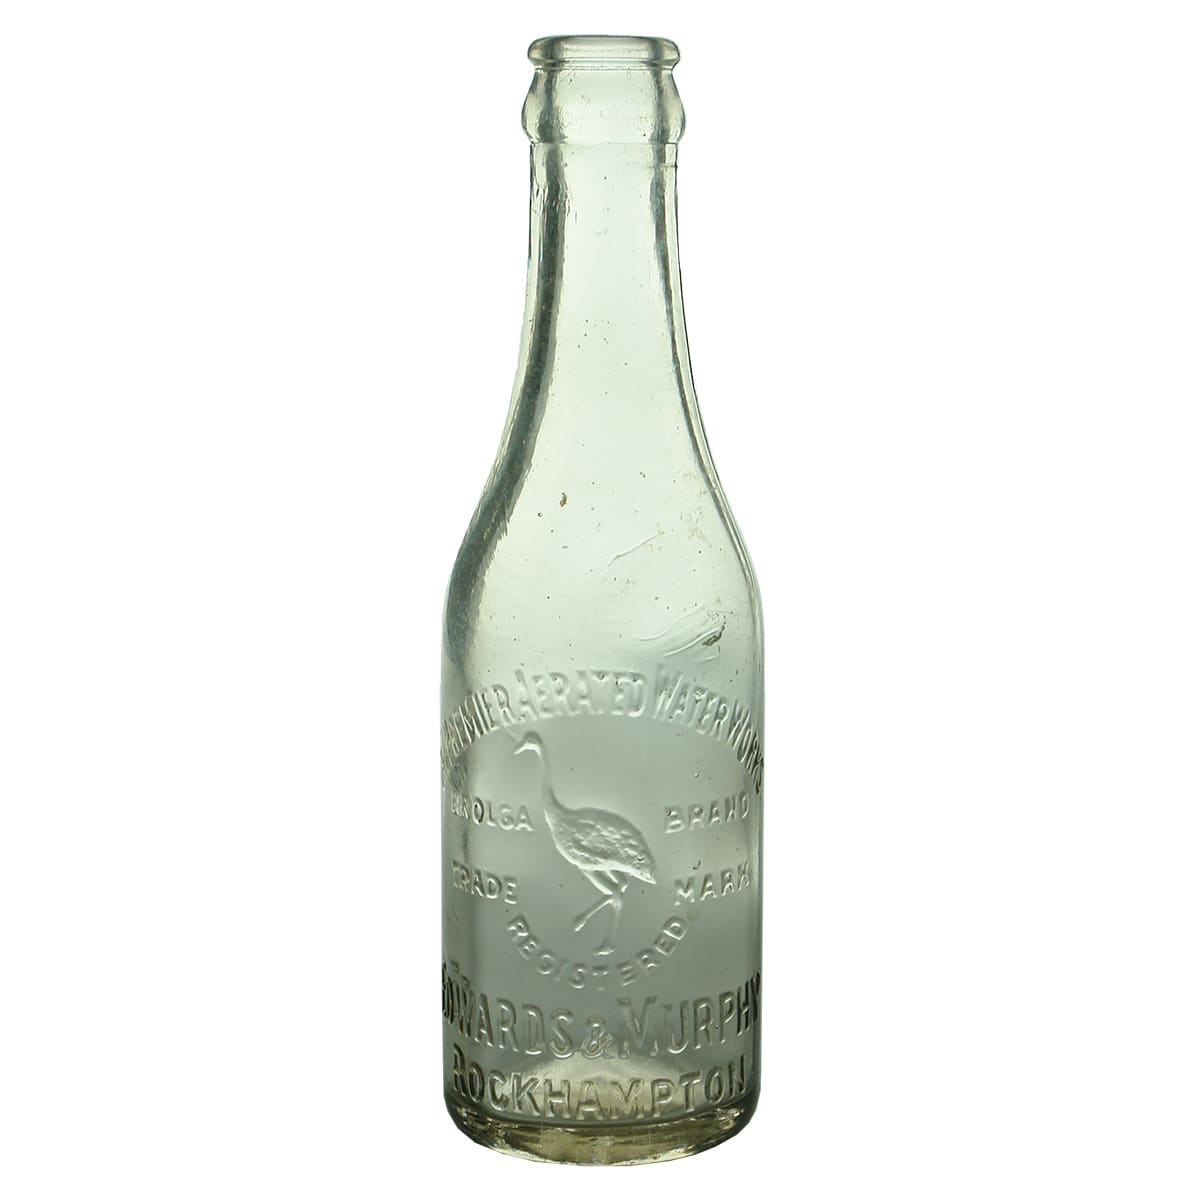 Crown Seal. Premier Aerated Waters, Edwards & Murphy, Rockhampton. Champagne. Clear. 6 oz.